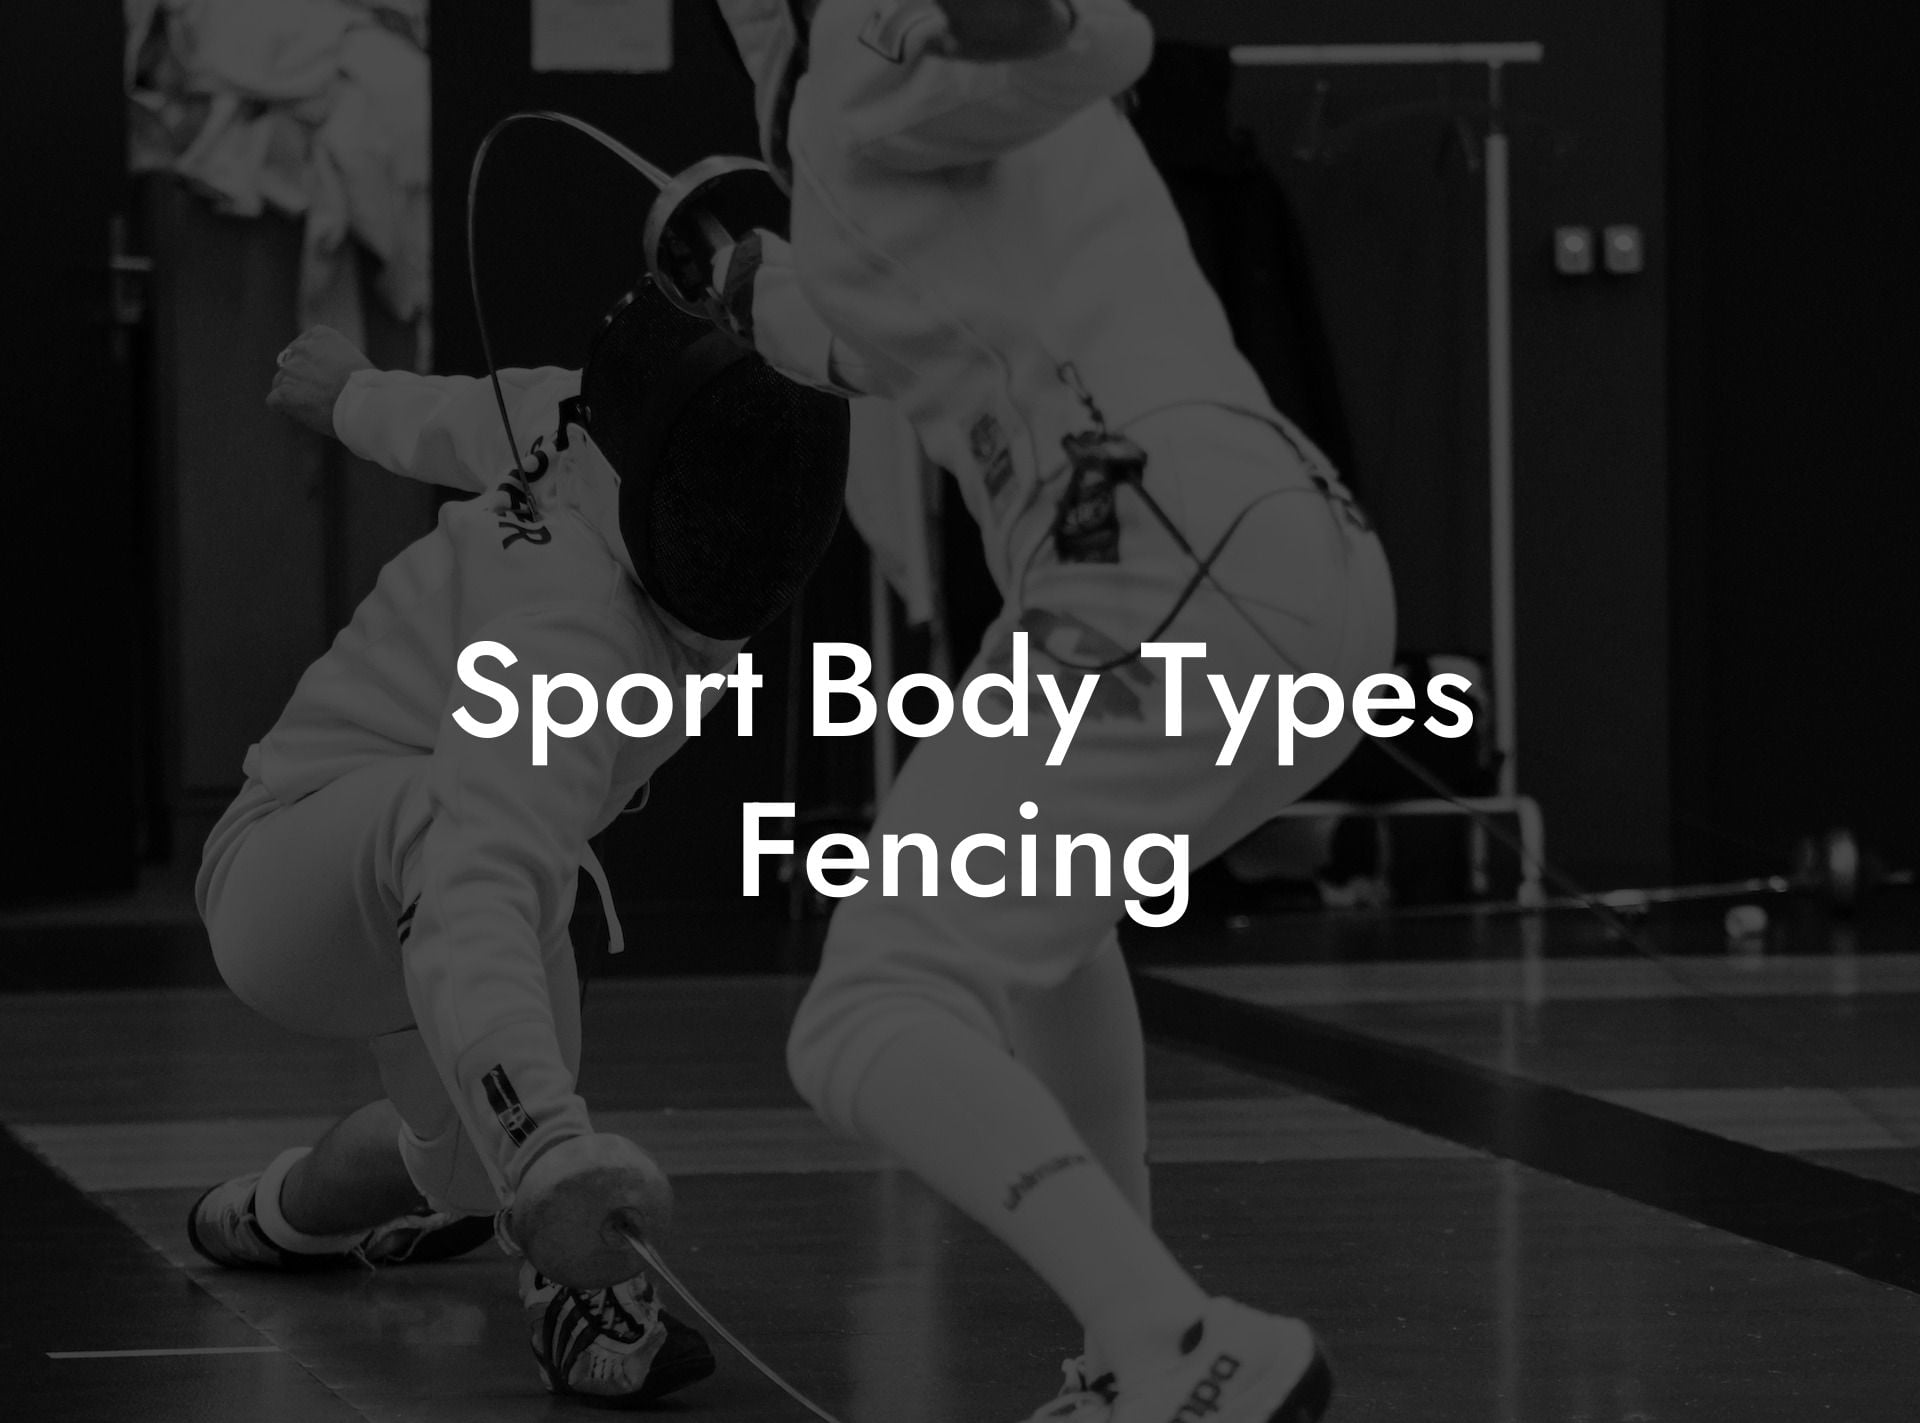 Sport Body Types Fencing